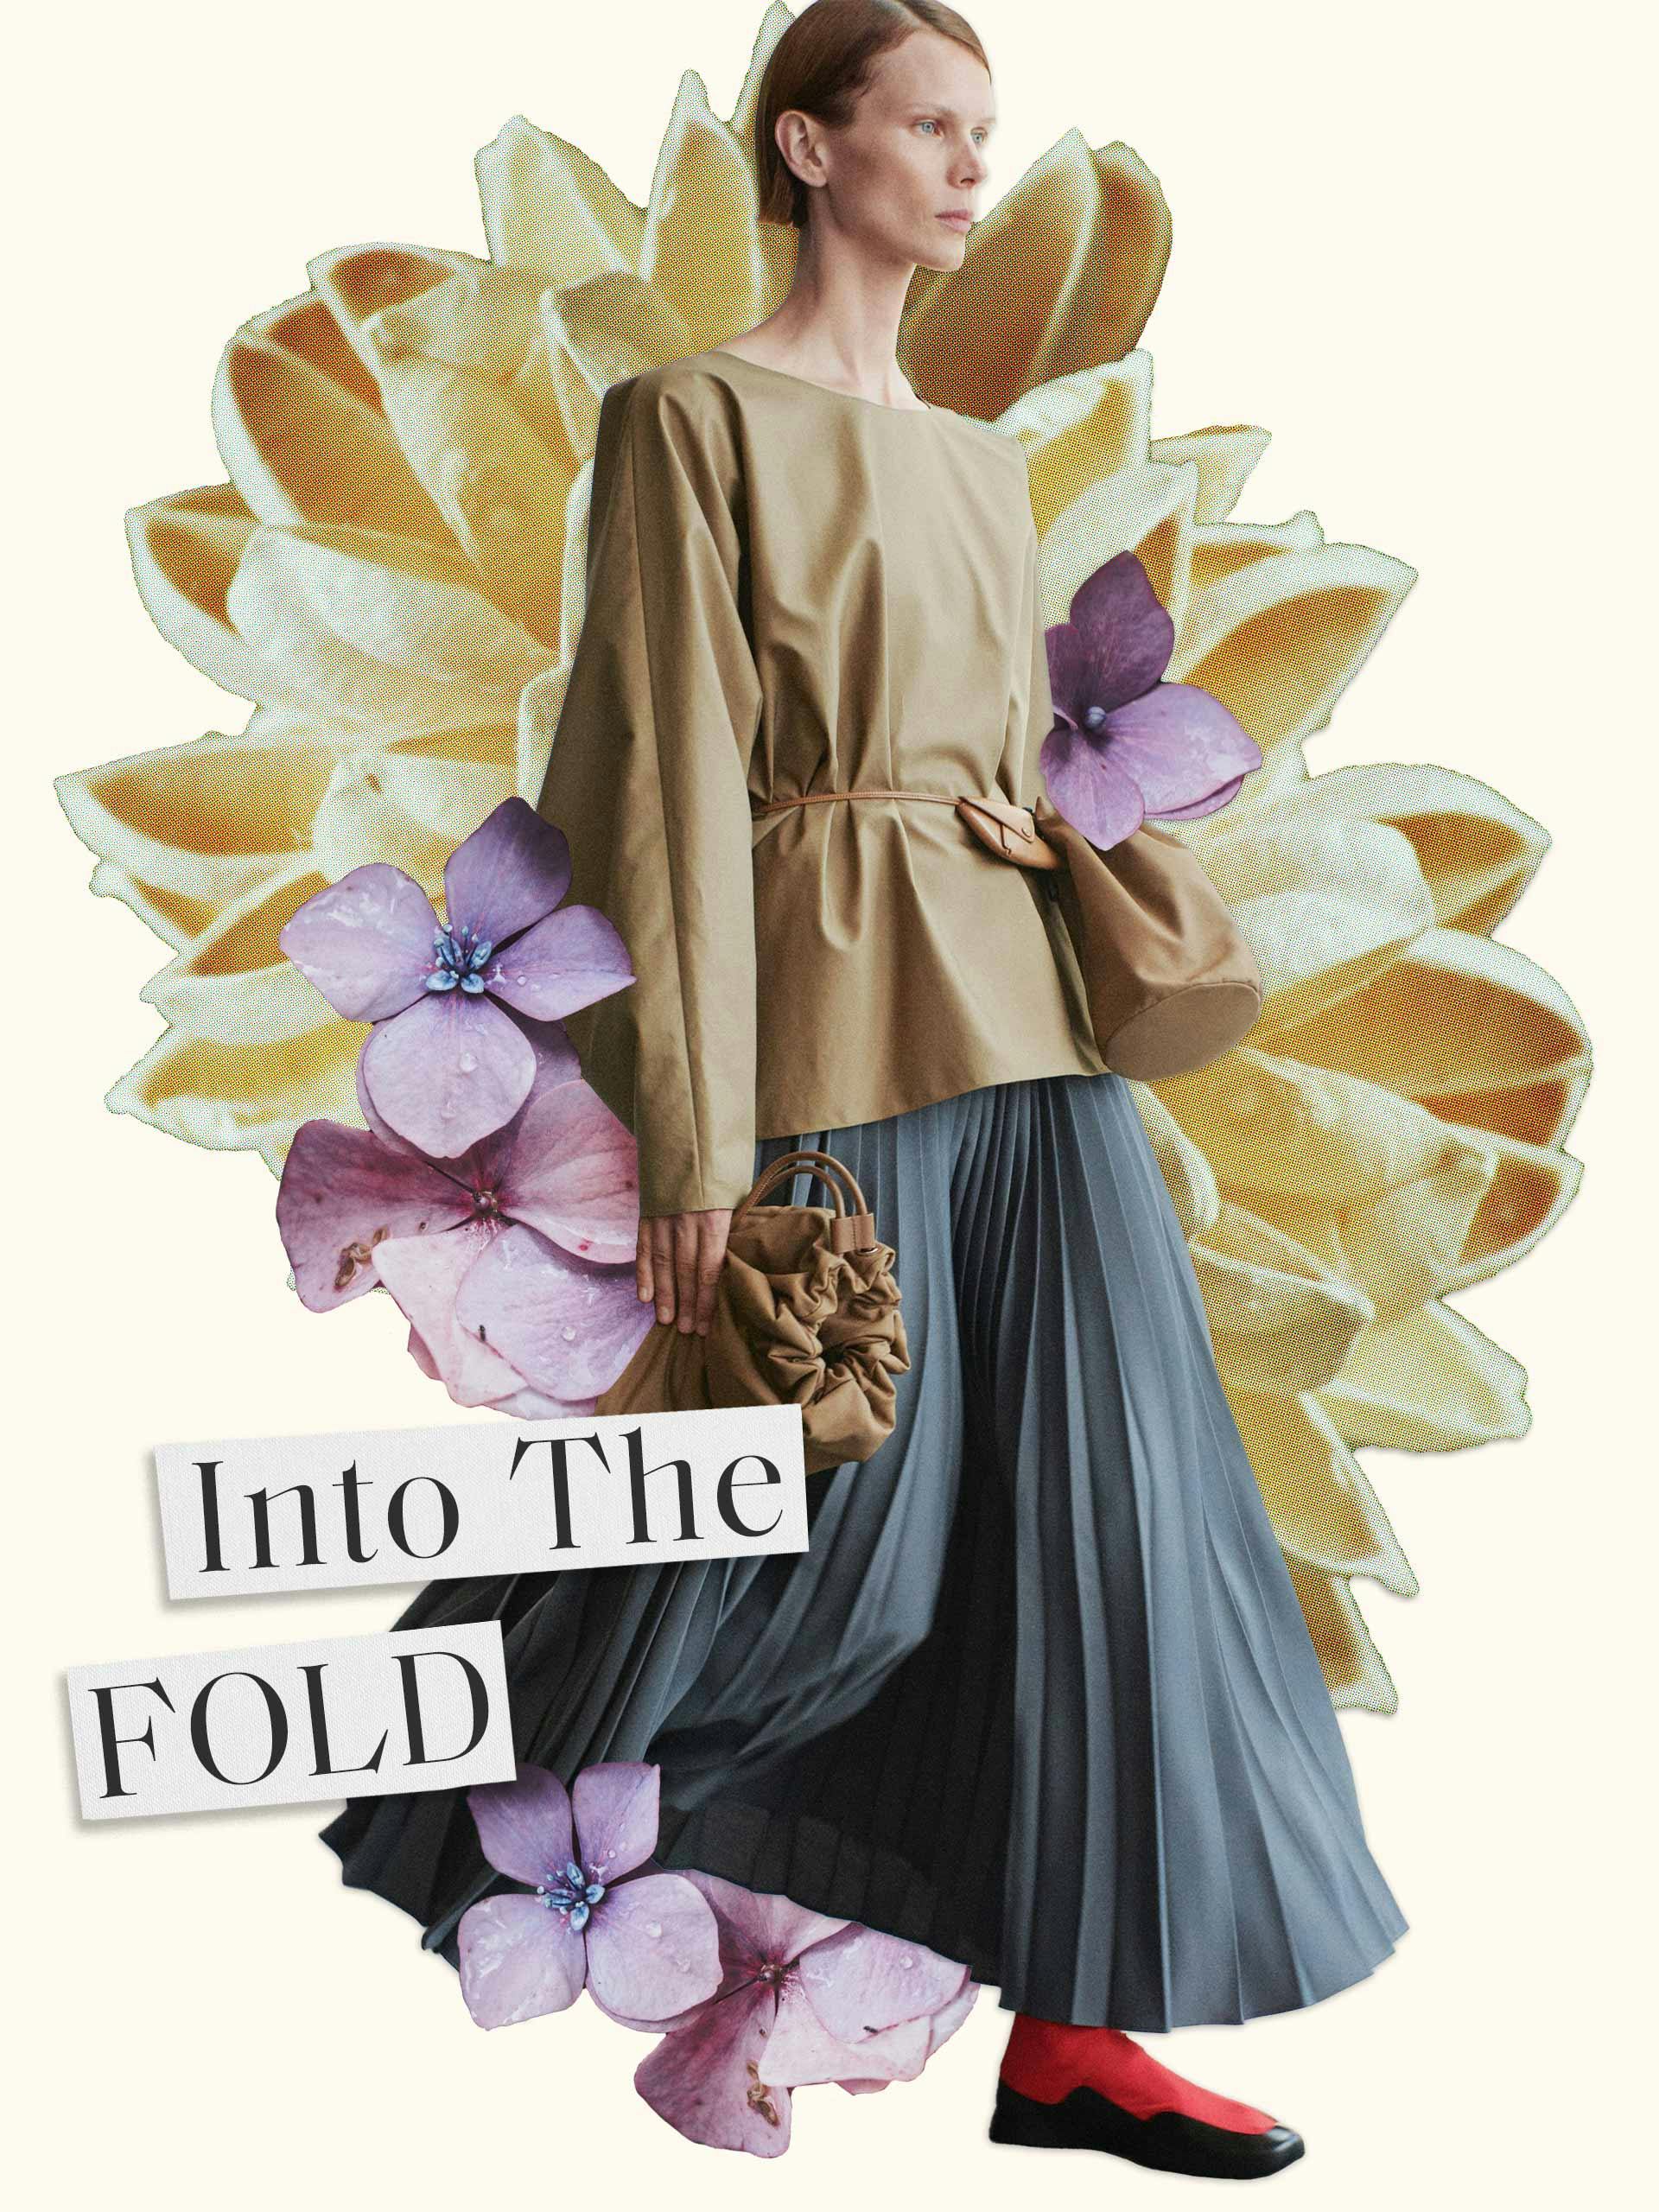 pleats-holding-collage-therow-ss22